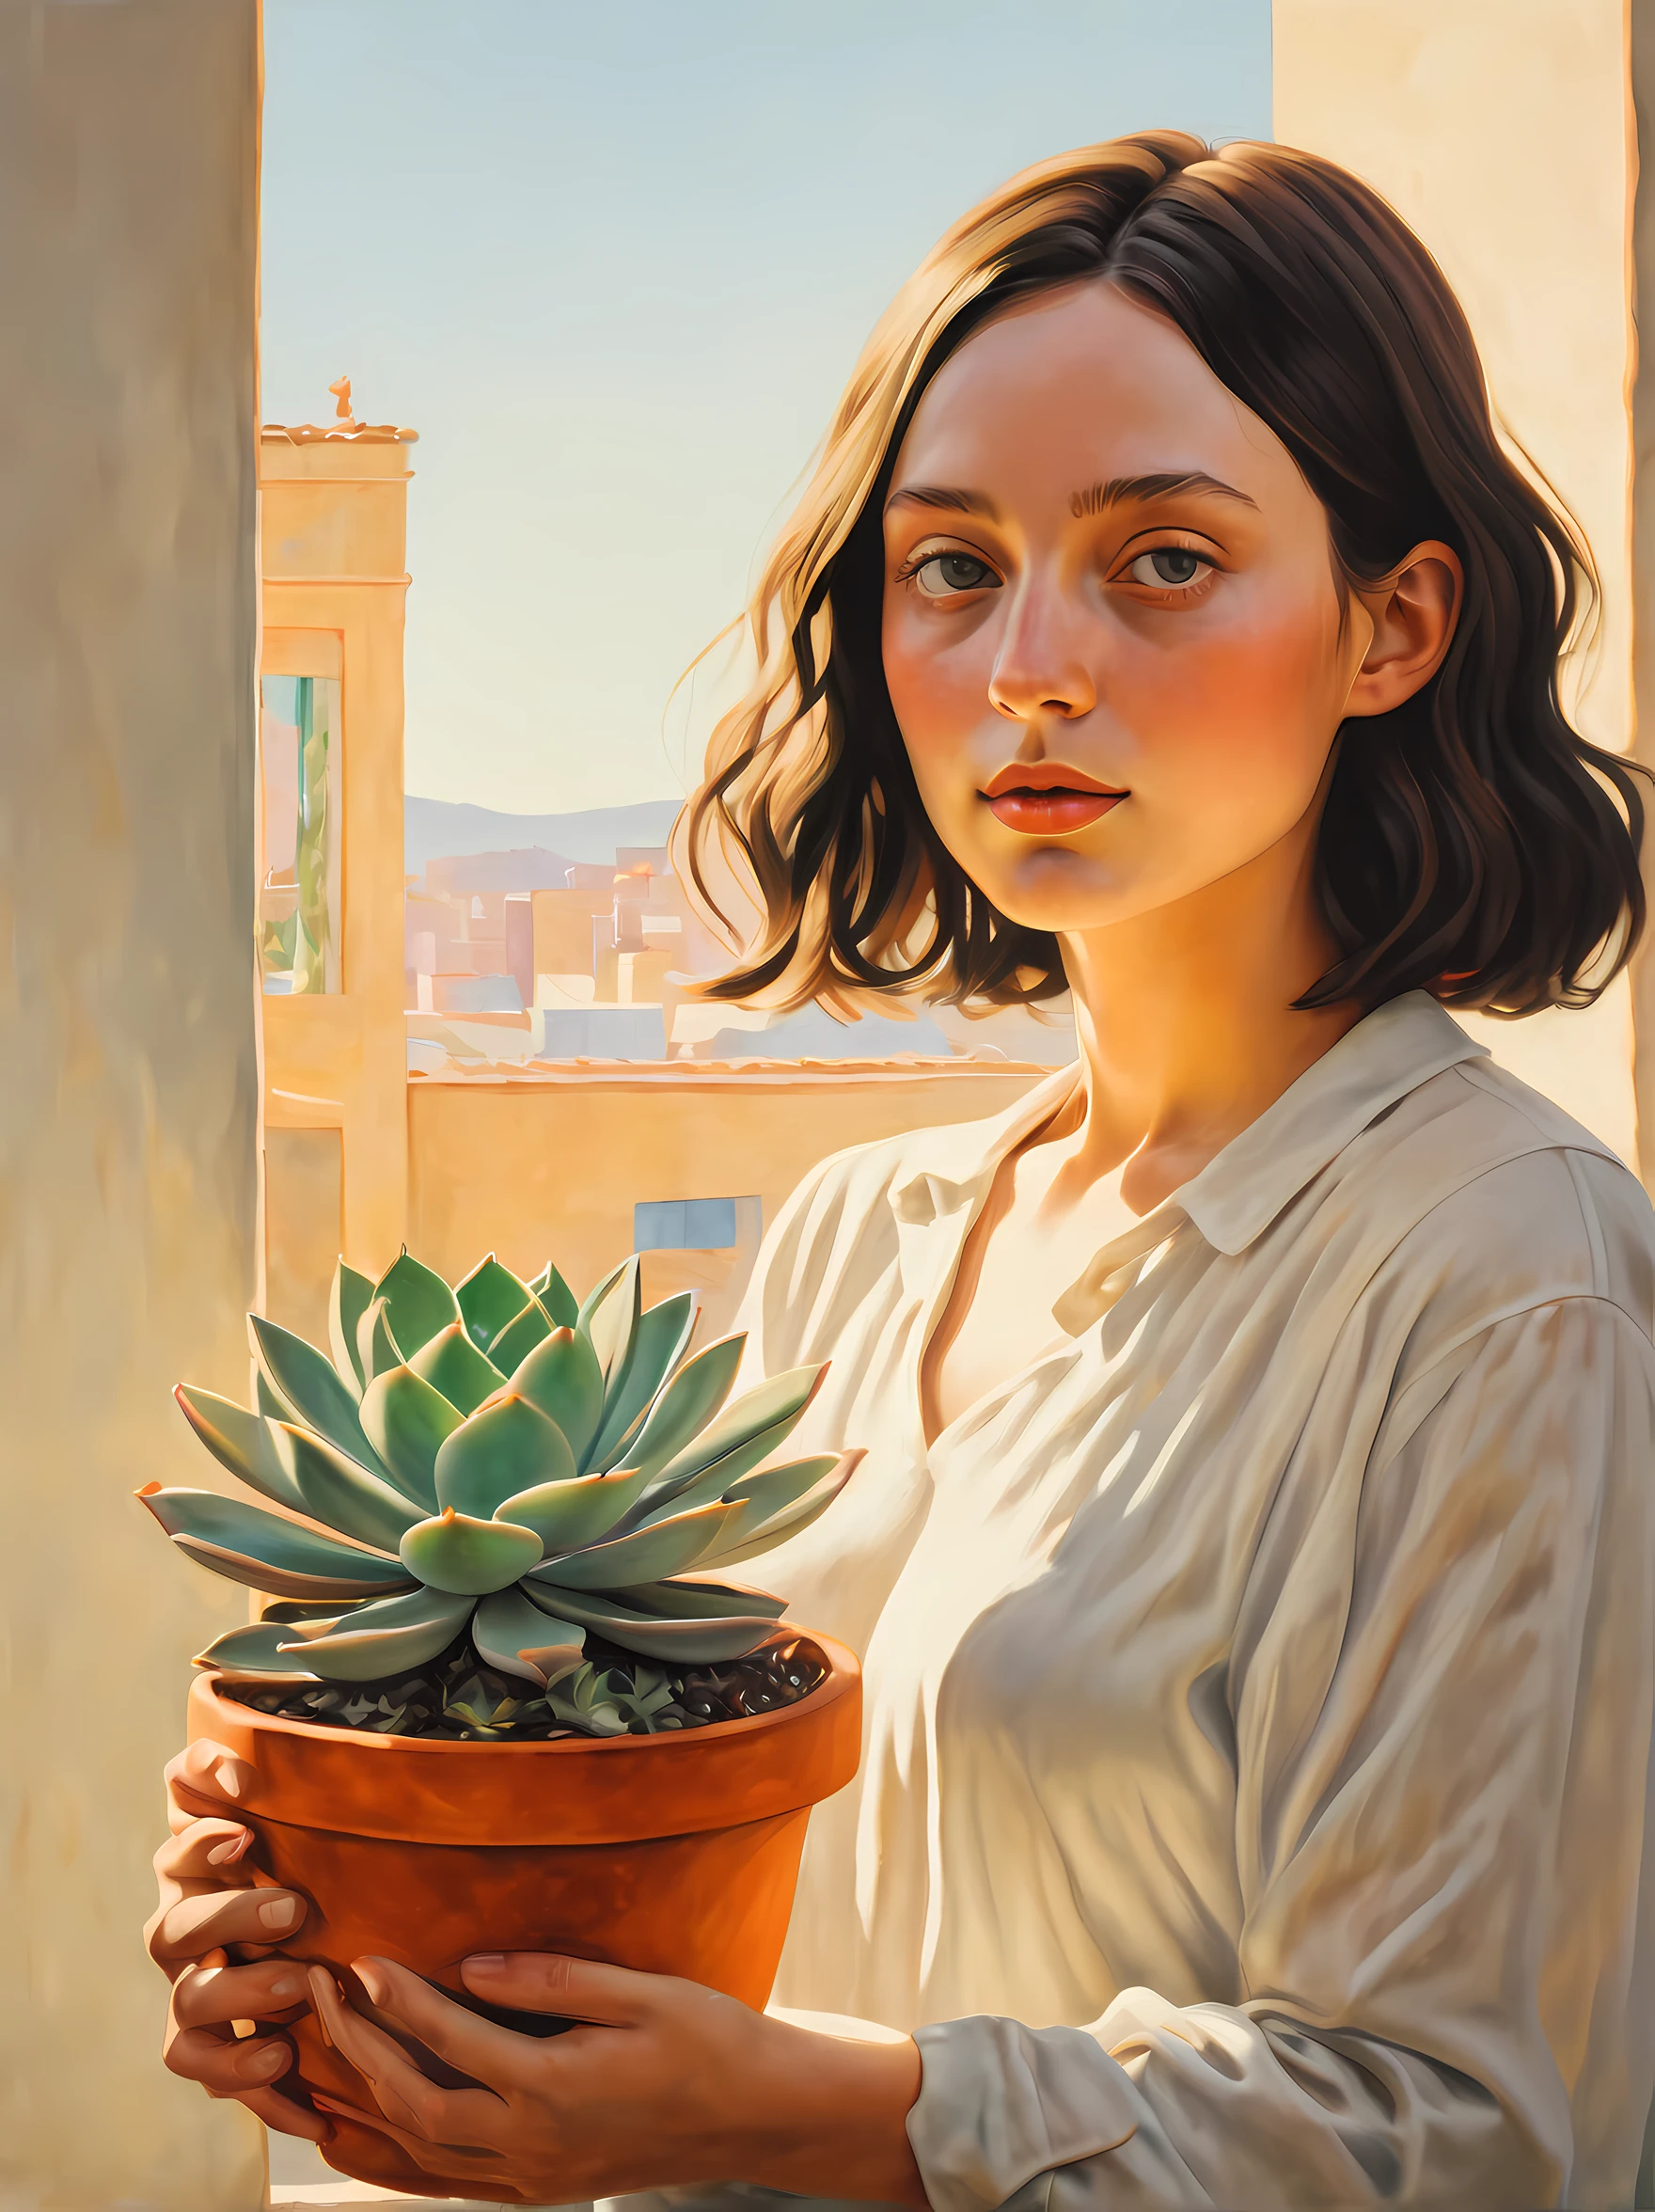 A breathtaking painting inspired by the memorable scene from "Leon: The Professional" where the young female protagonist tenderly holds a succulent plant in a flower pot, basking in the warm embrace of sunlight. The artist skillfully brings out the vibrant colors and intricate details of the plant, making it the focal point of the composition. The painting exudes a sense of tranquility and serenity, inviting viewers to appreciate the beauty of nature and the delicate connection between humans and plants. Created by renowned contemporary artist Georgia O'Keeffe, this masterpiece celebrates the simple yet profound beauty found in everyday moments，((Best quality)), ((Masterpiece)), ((Realistic))，axial symmetry，anatomy correct，